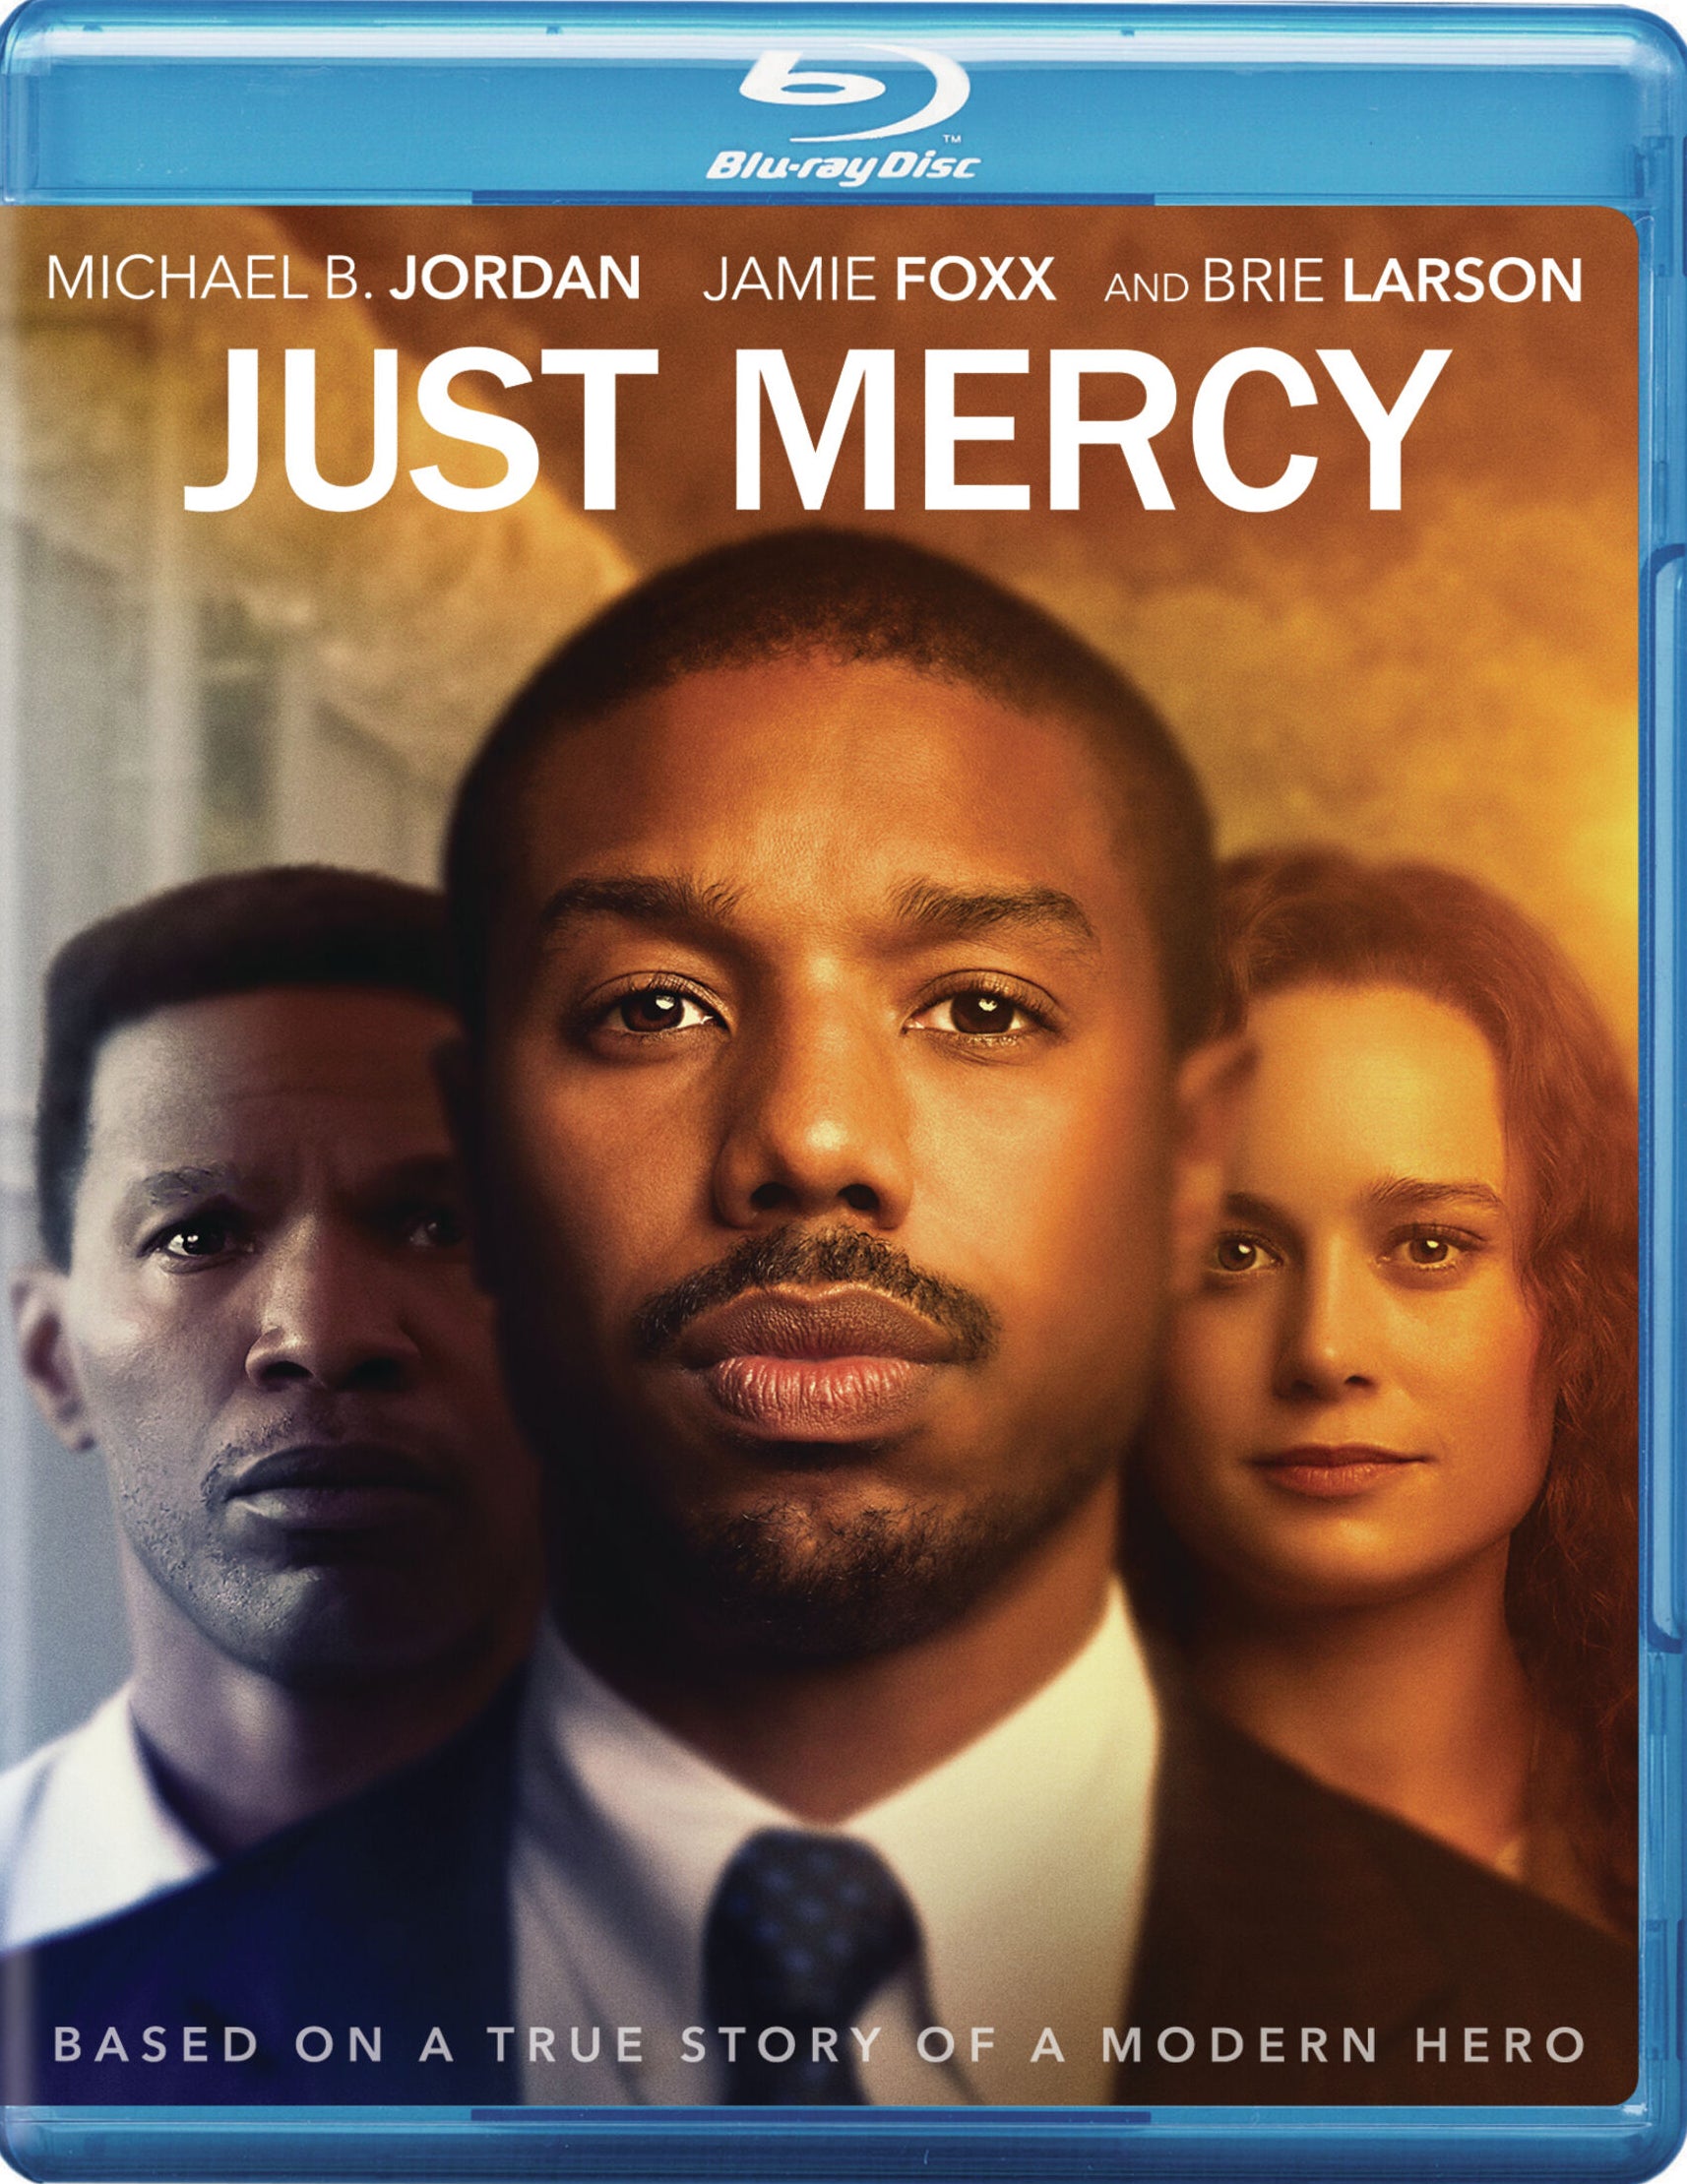 Just Mercy [Blu-ray] cover art